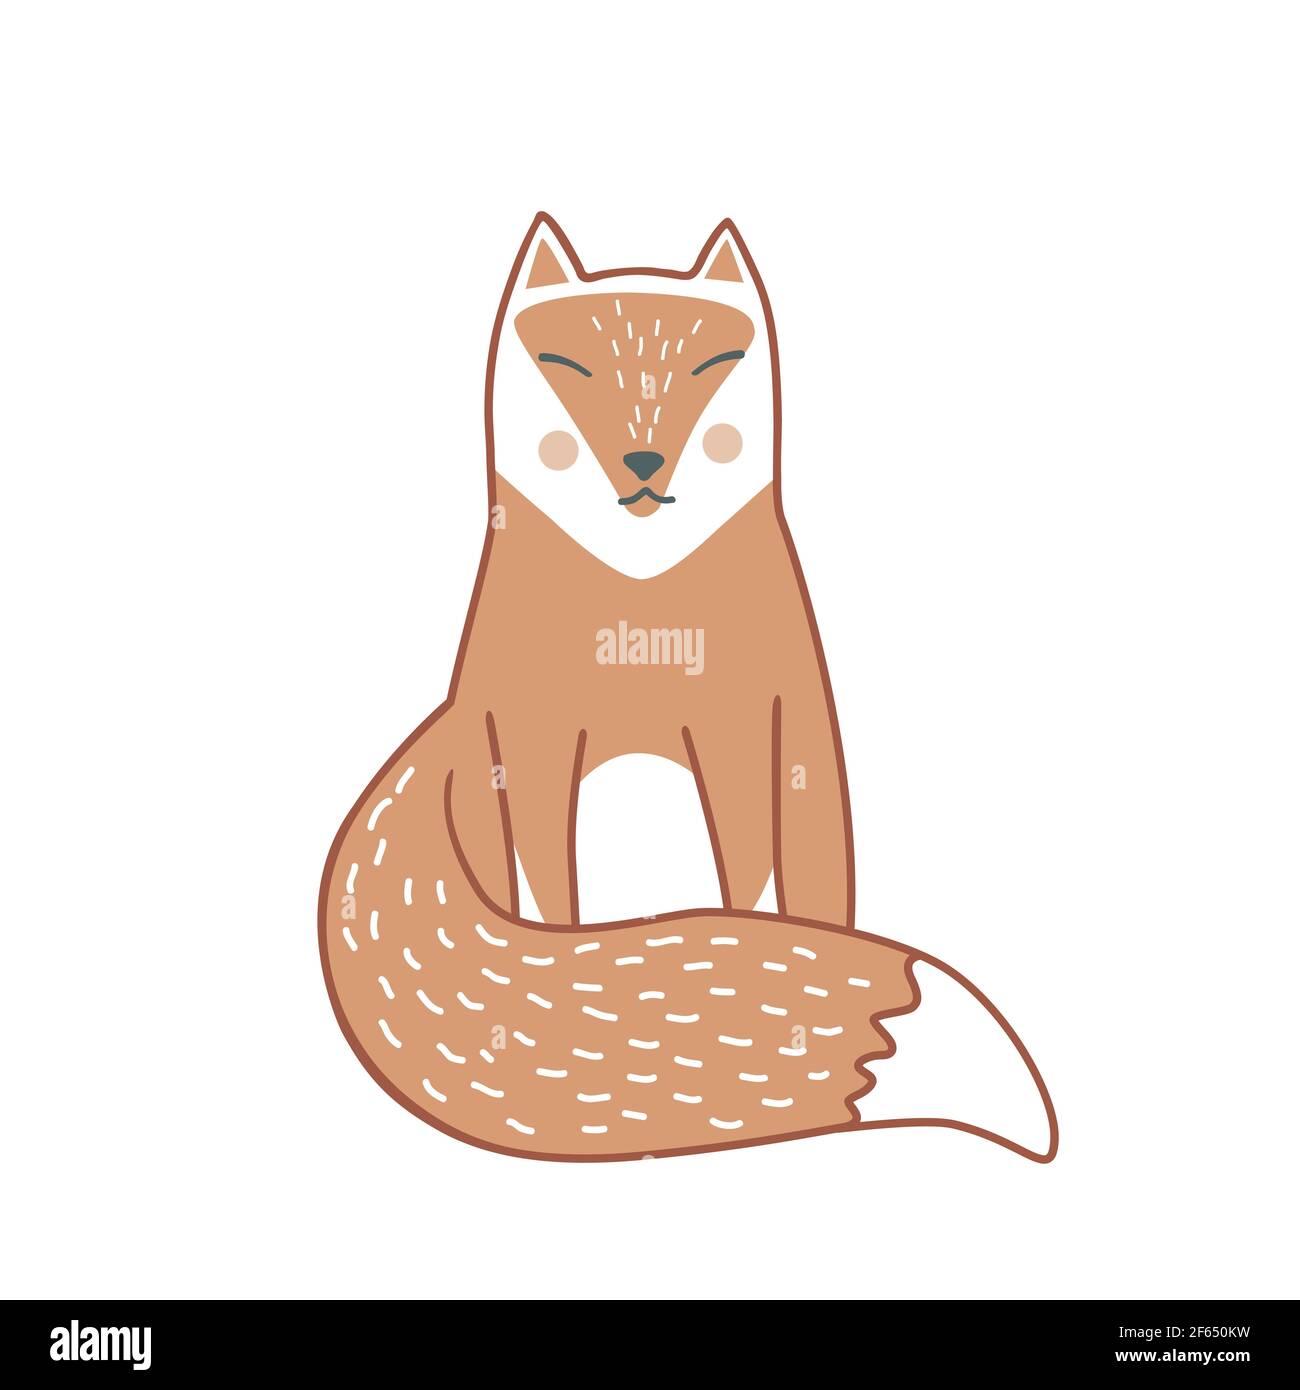 Wild sleeping fox hand drawn in Scandinavian style. Vector illustration isolated on white. Swedish art for poster, card, t-shirt, textile, print, home Stock Vector